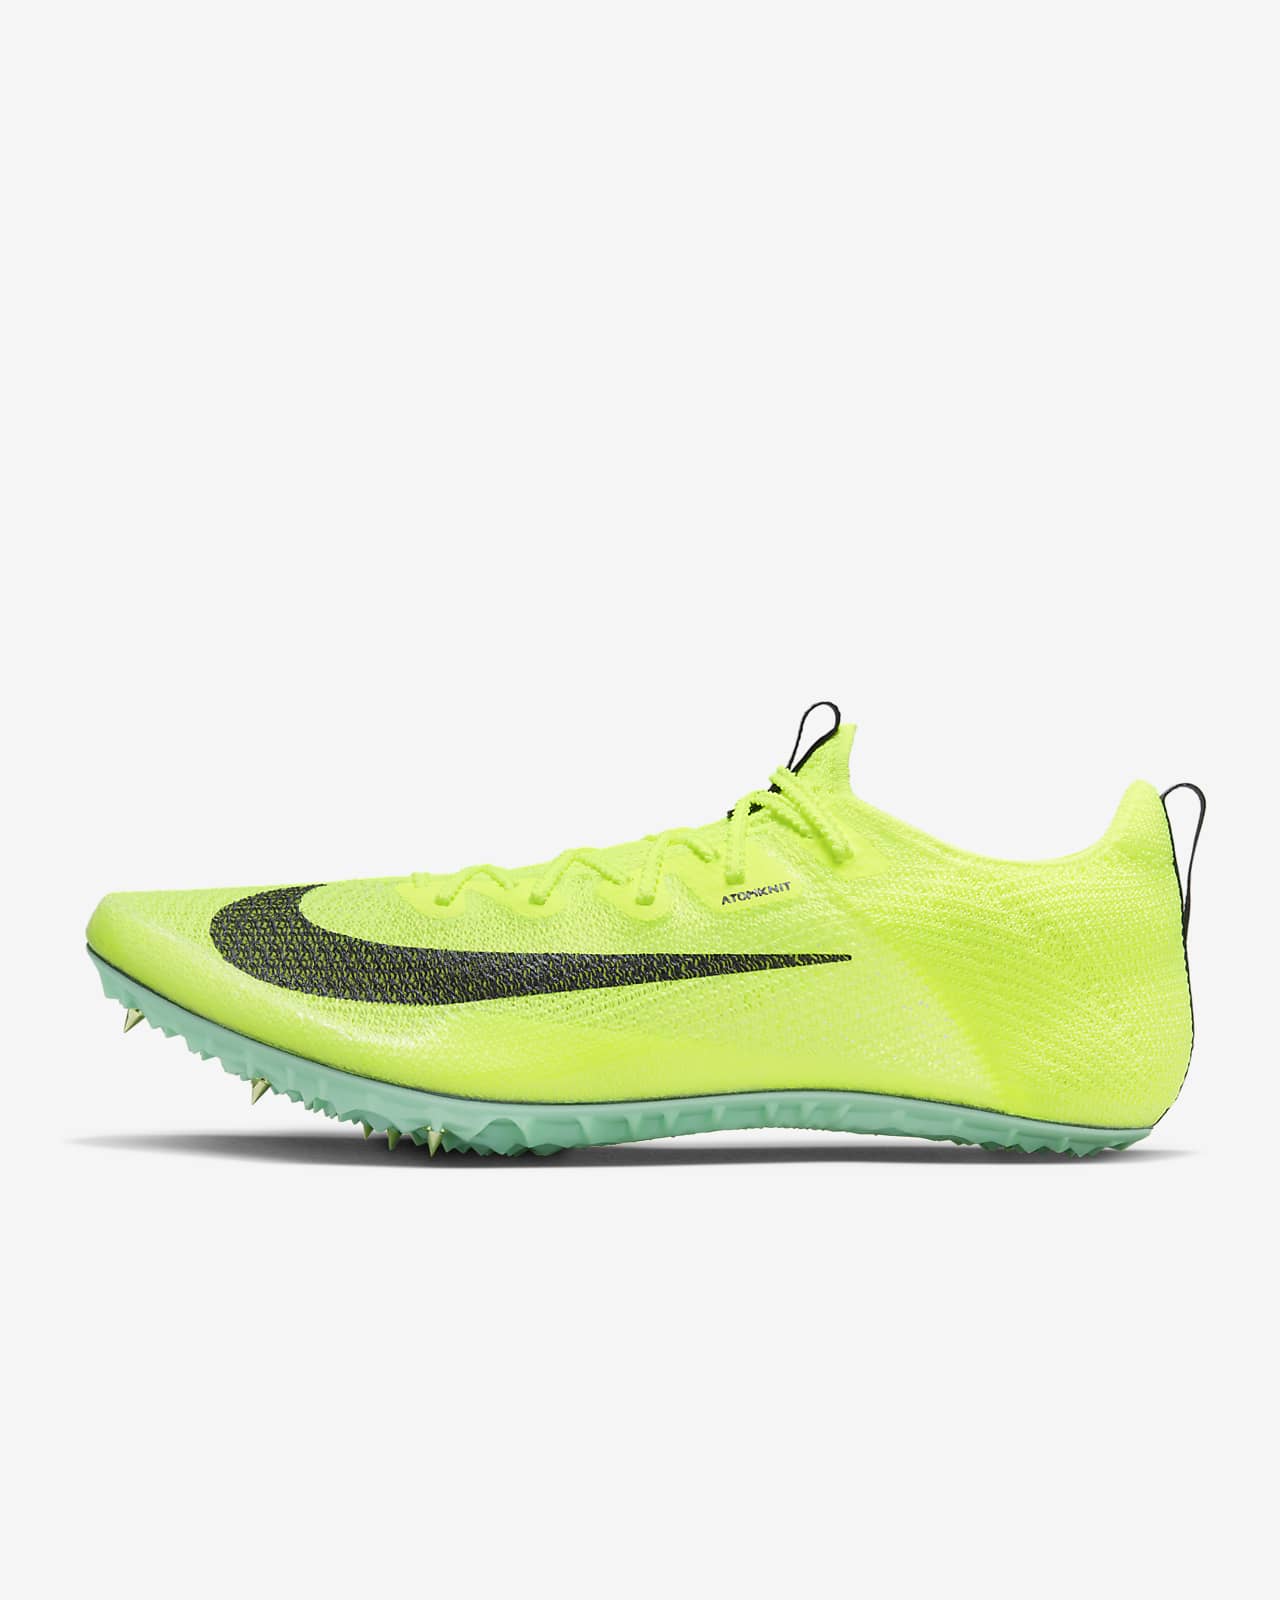 horsepower Suppose Deception Nike Zoom Superfly Elite 2 Track & Field Sprinting Spikes. Nike.com